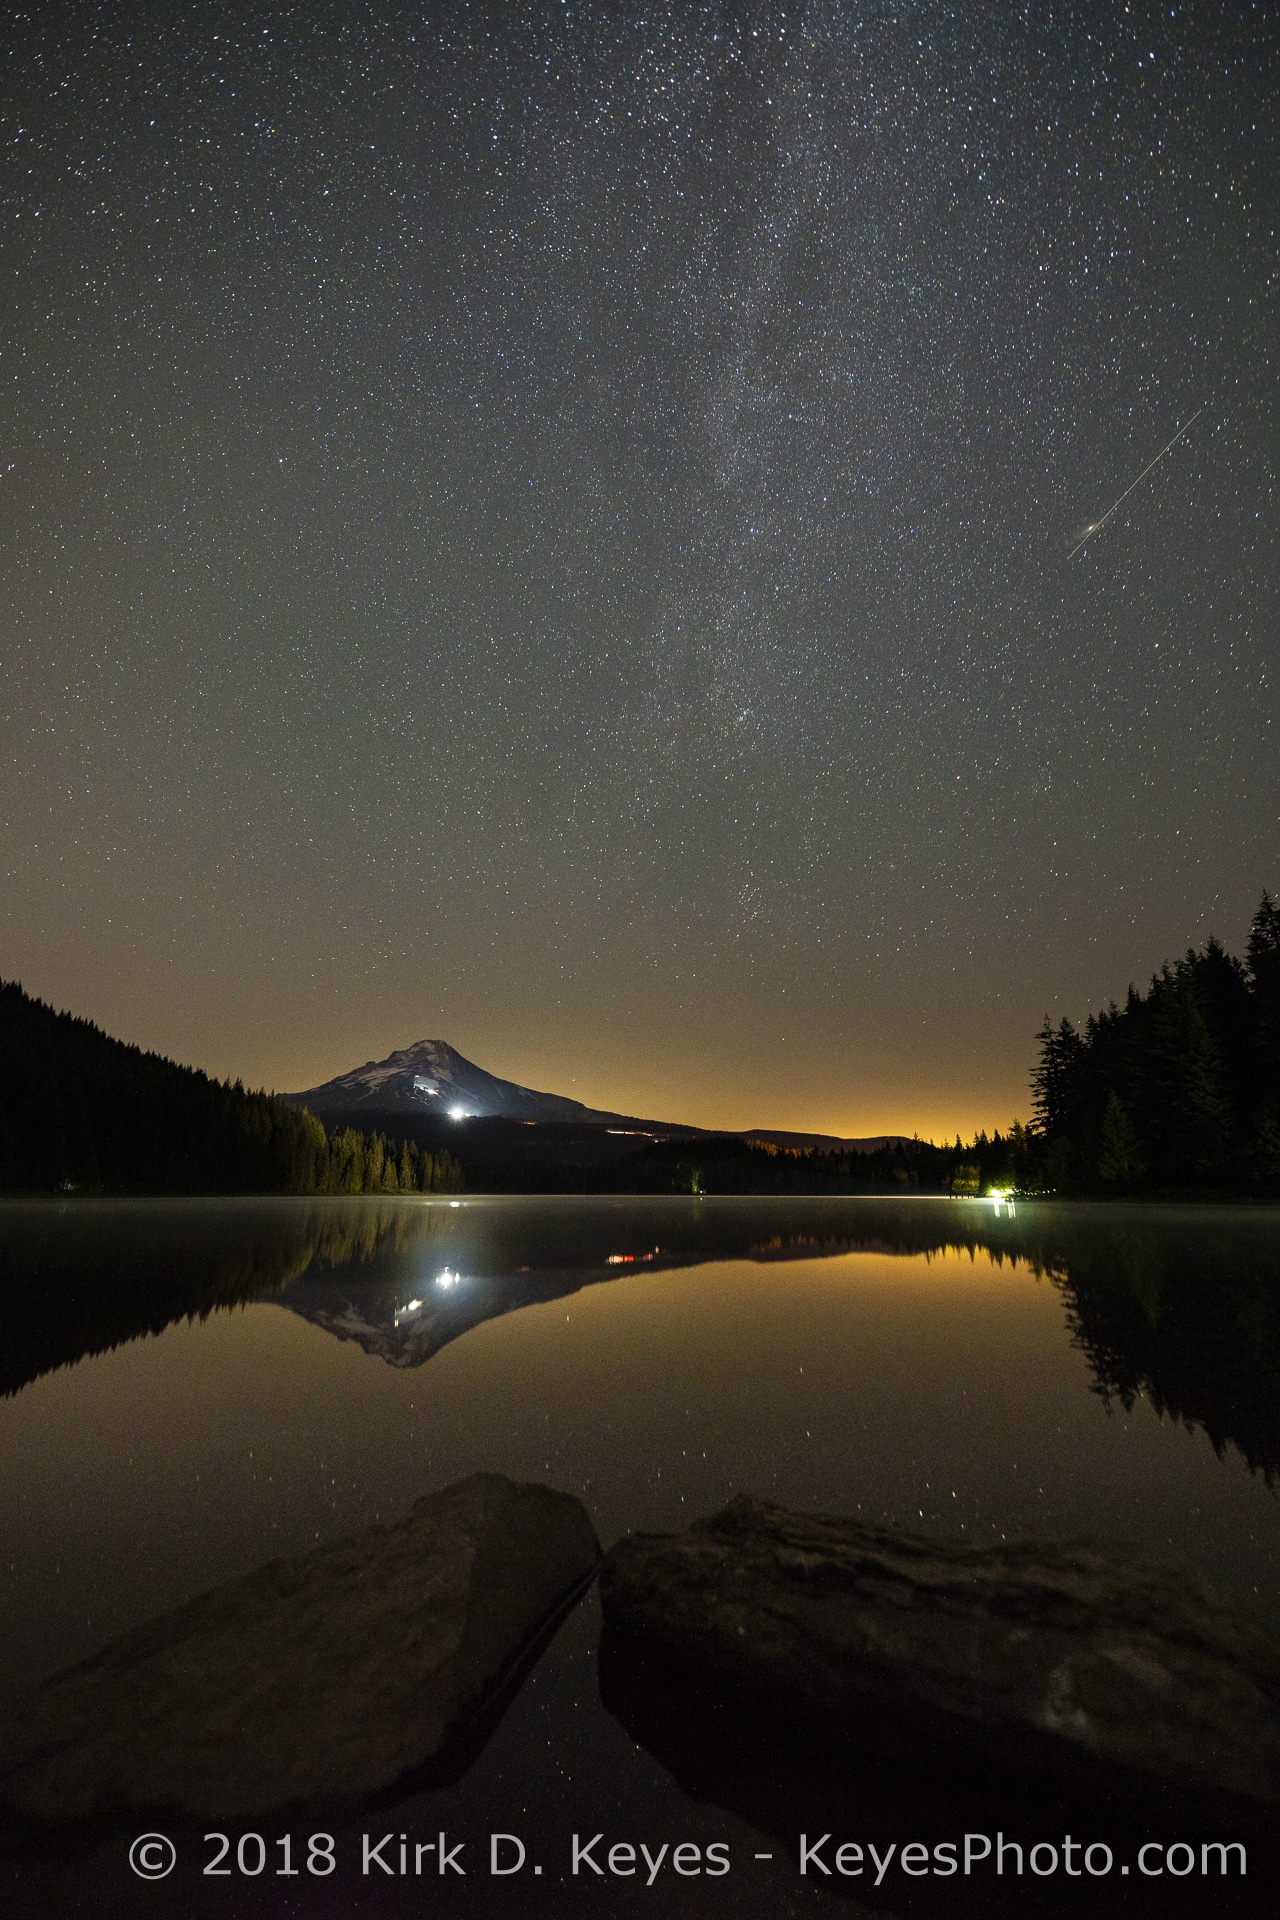 Milky Way with Mt. Hood at Trillium Lake, OR - Astro-Landscape September 2018 - keyesphoto.com